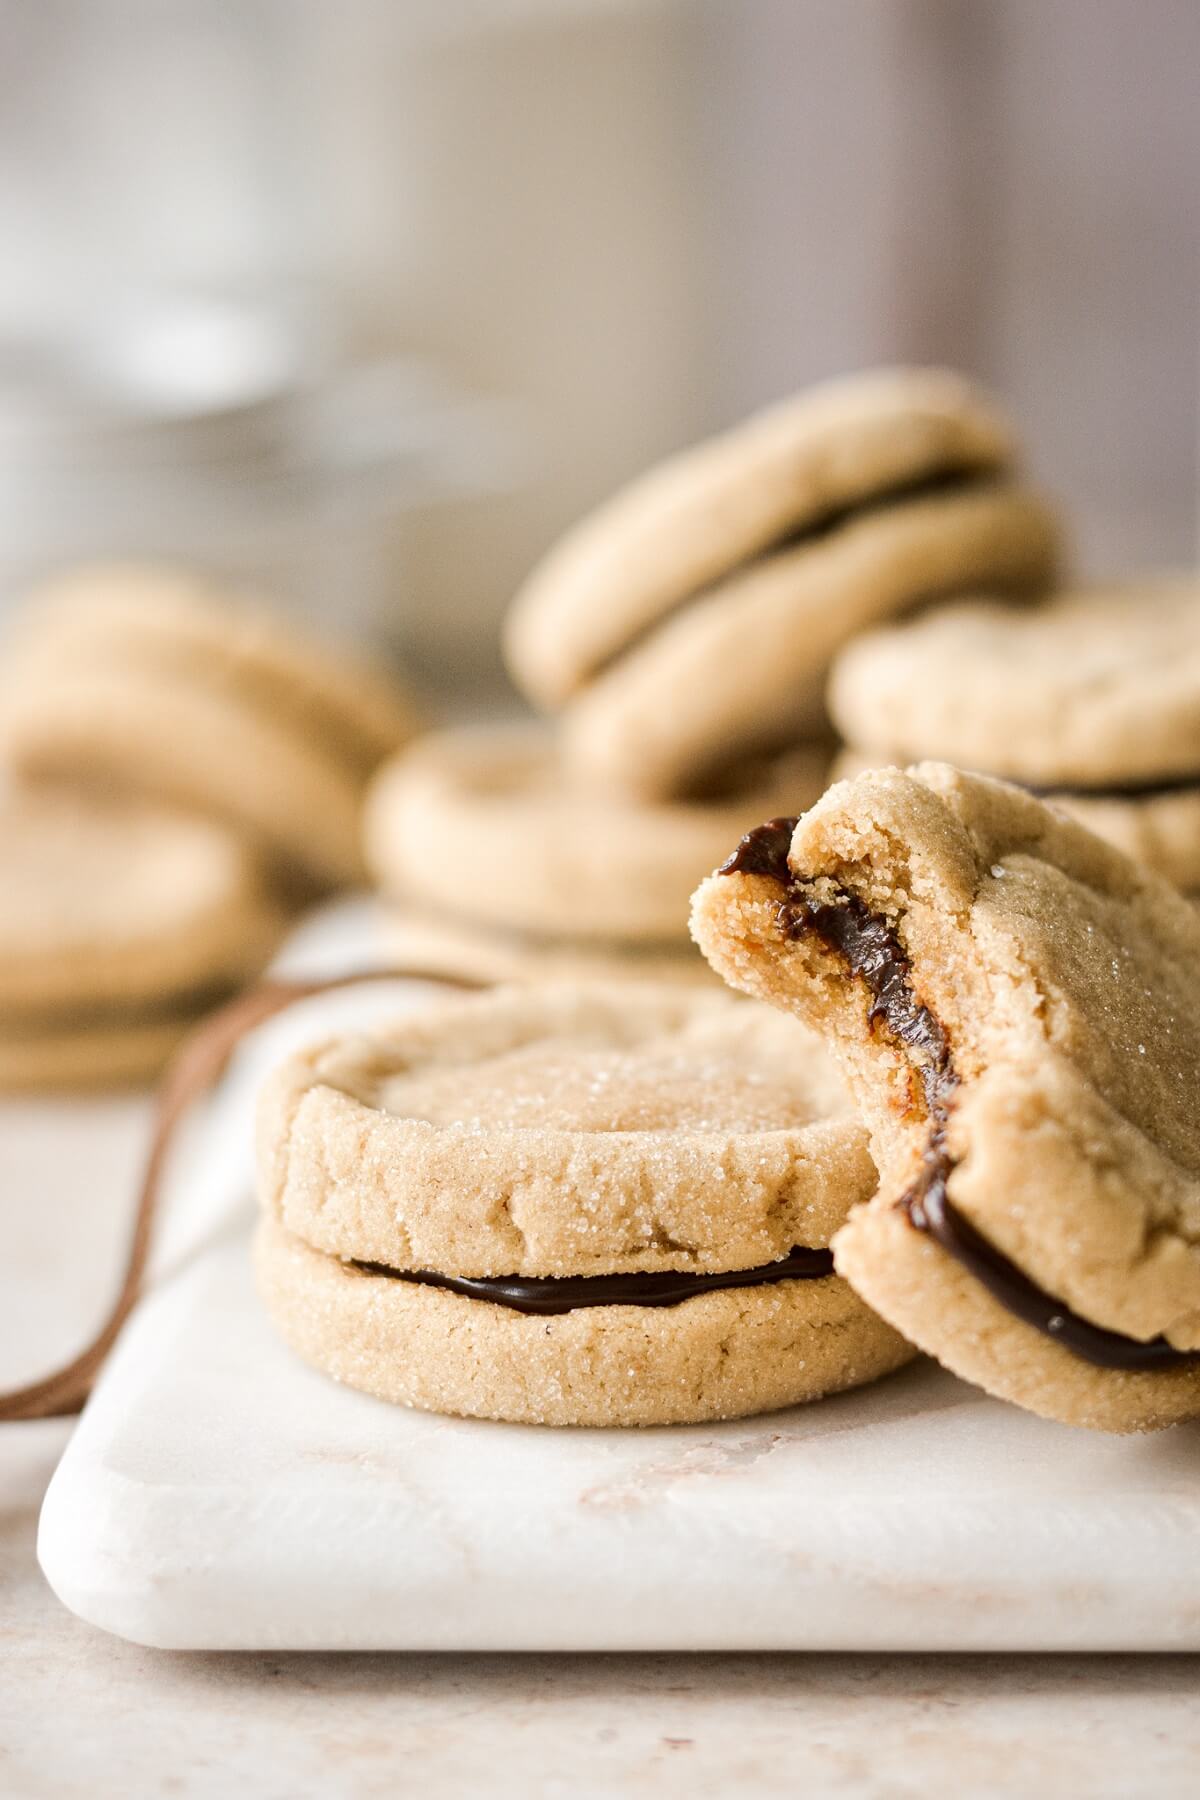 Butterscotch cookies filled with ganache.